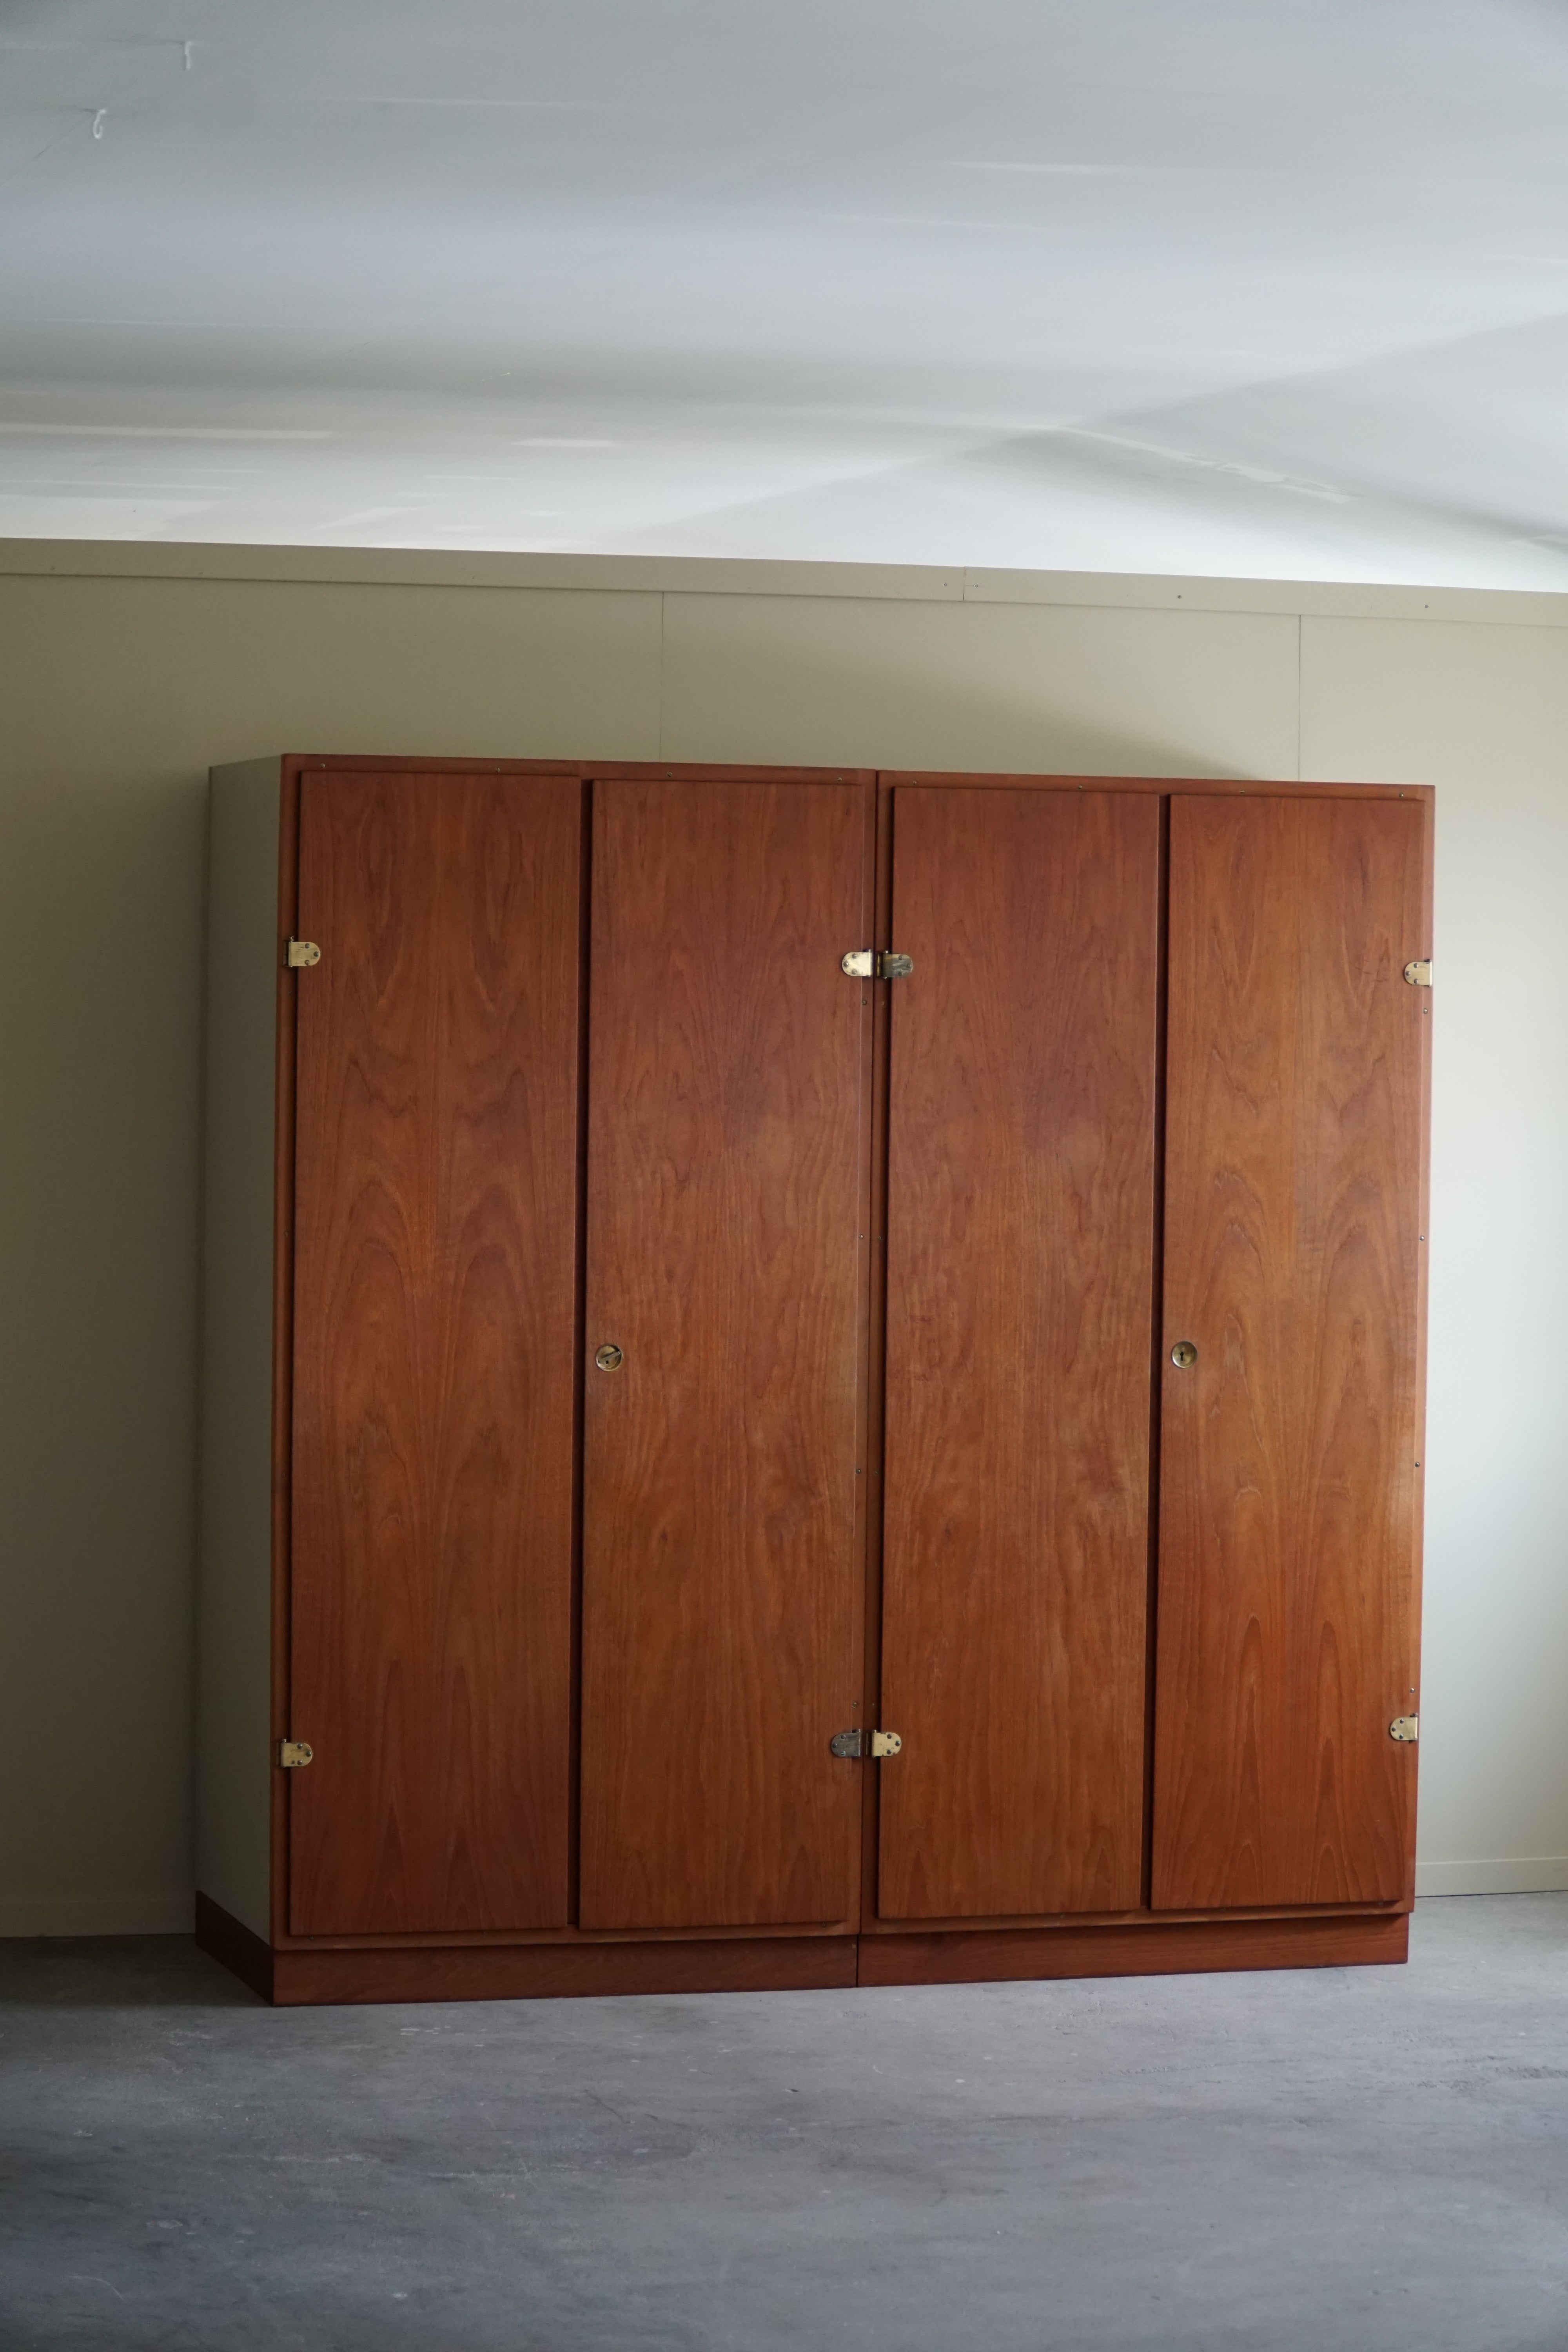 A classic wardrobe with upper cabinets in oregon pine with fronts in teak and leather handles, known as 'Boligens Byggeskabe', designed by Børge Mogensen & Grethe in 1956. The wardrobe's design reflects the Danish modern style, characterized by